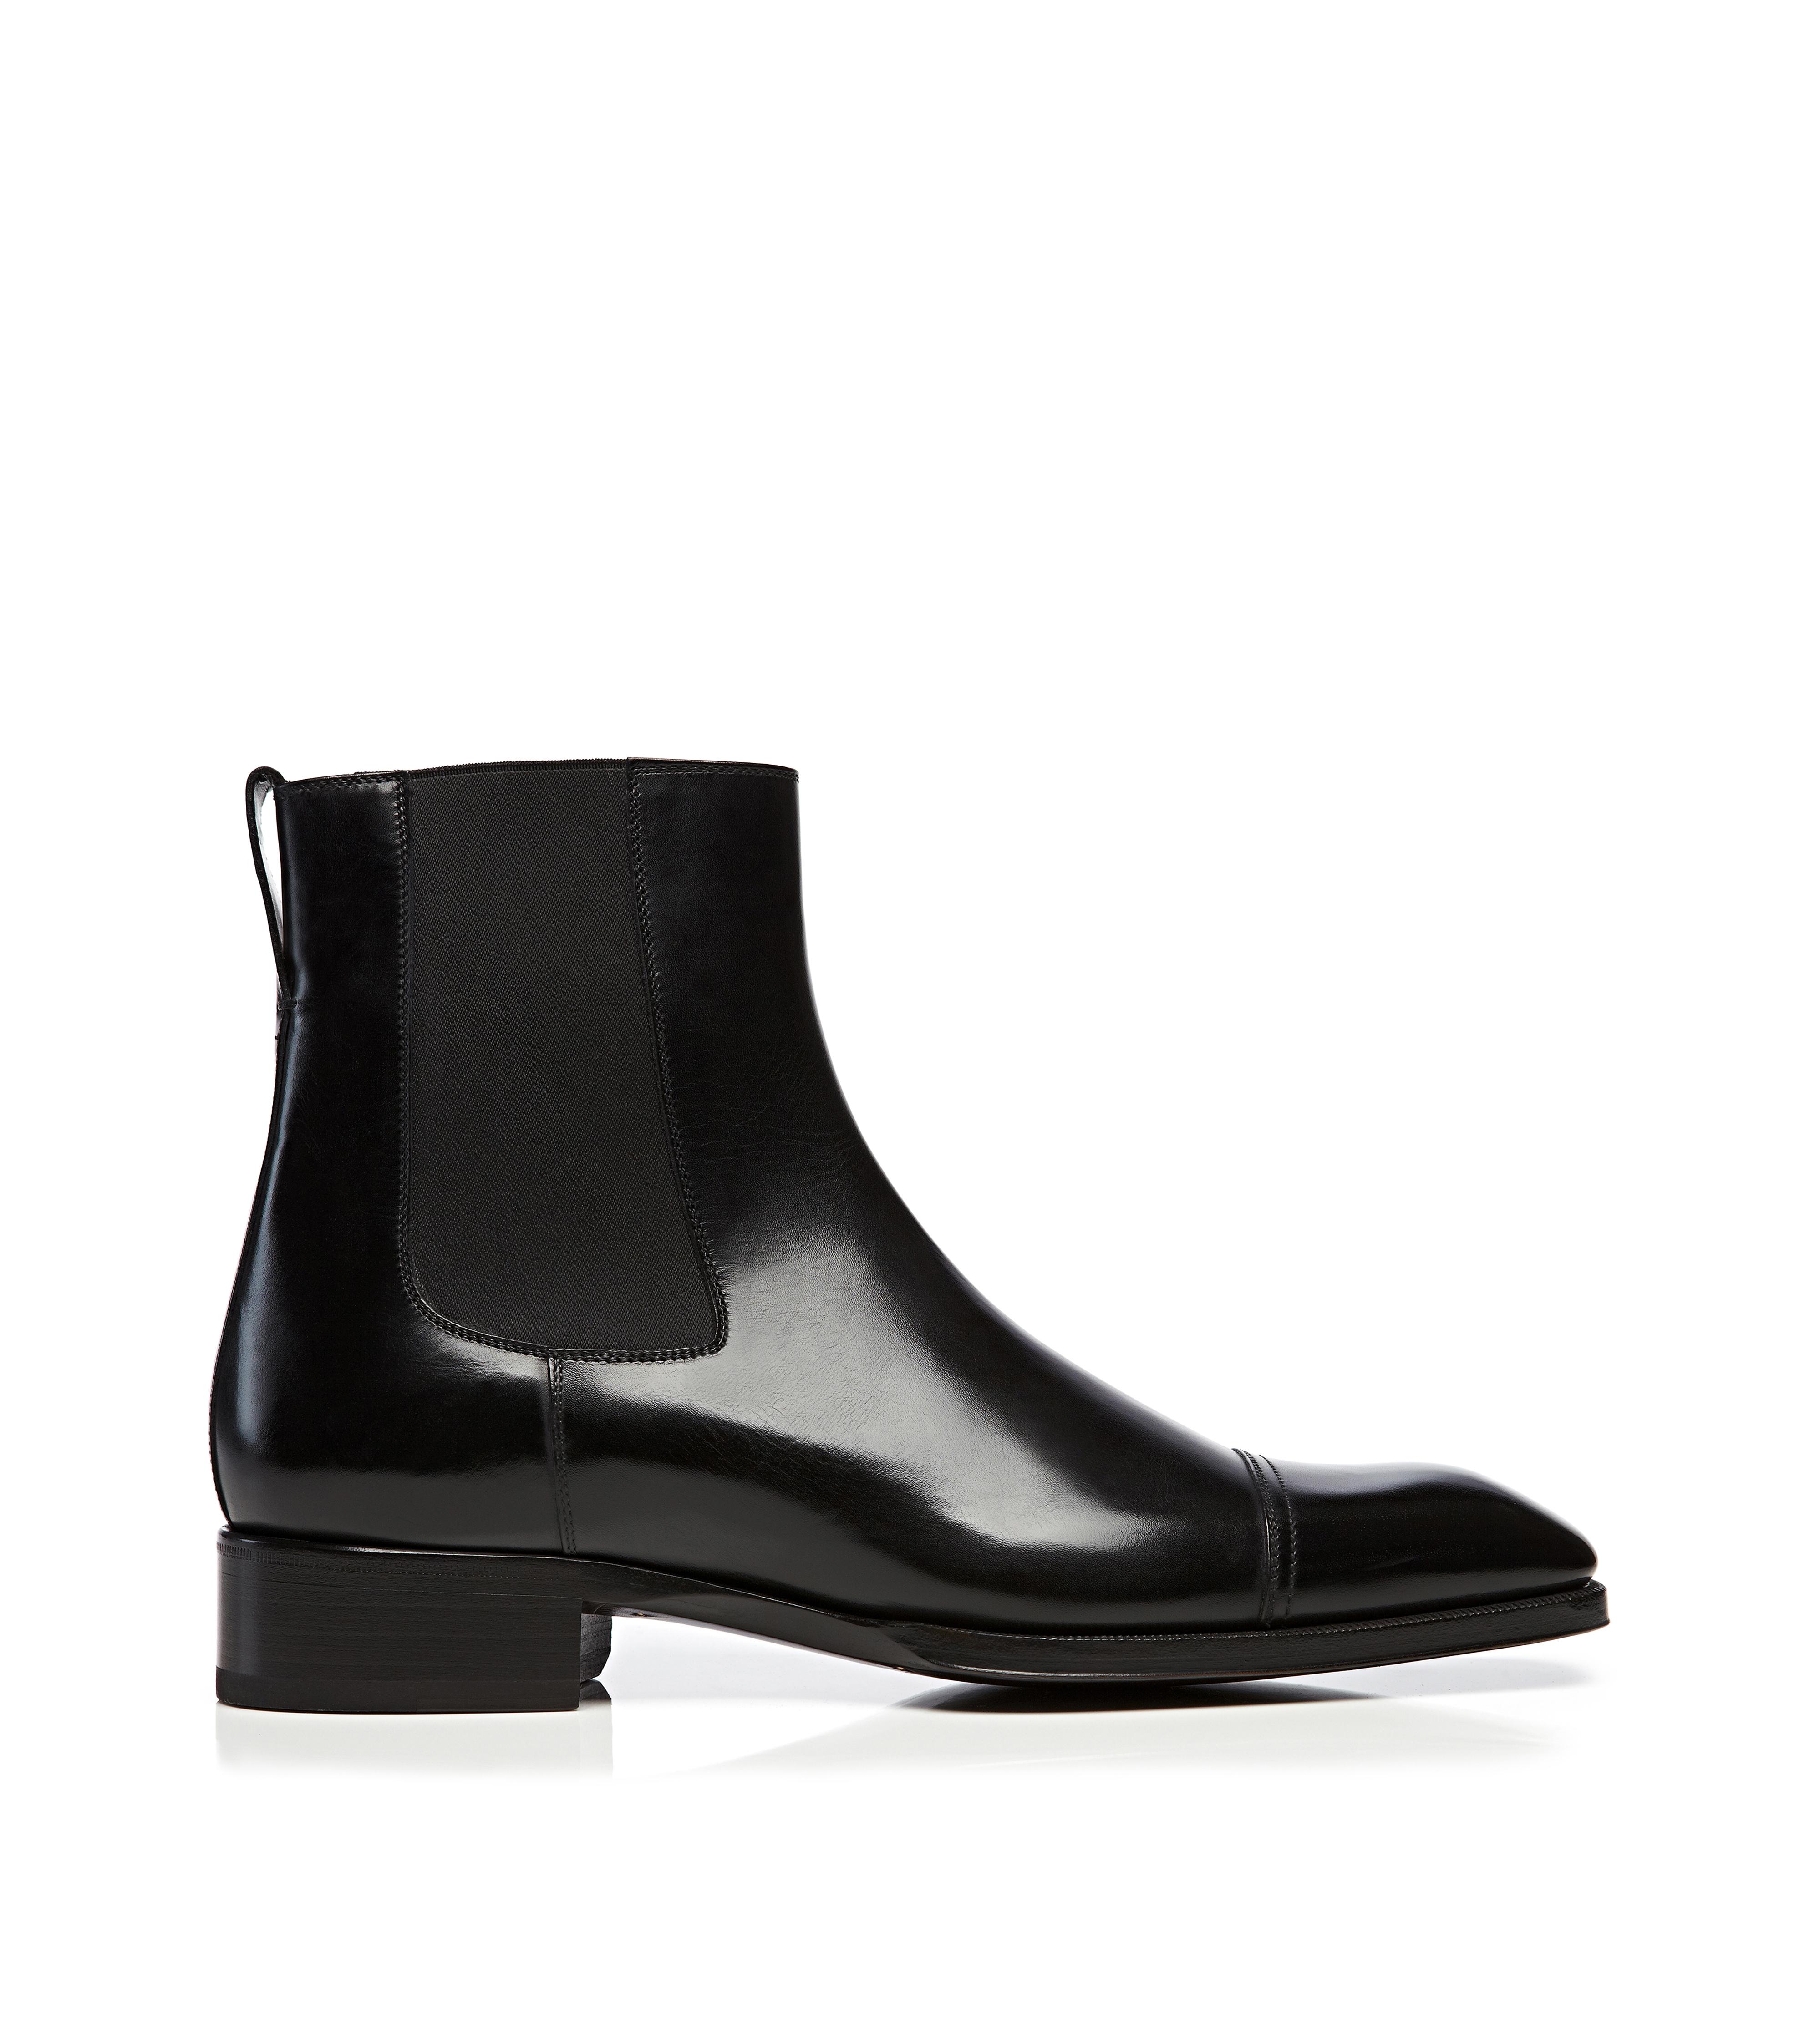 tom ford edgar boots